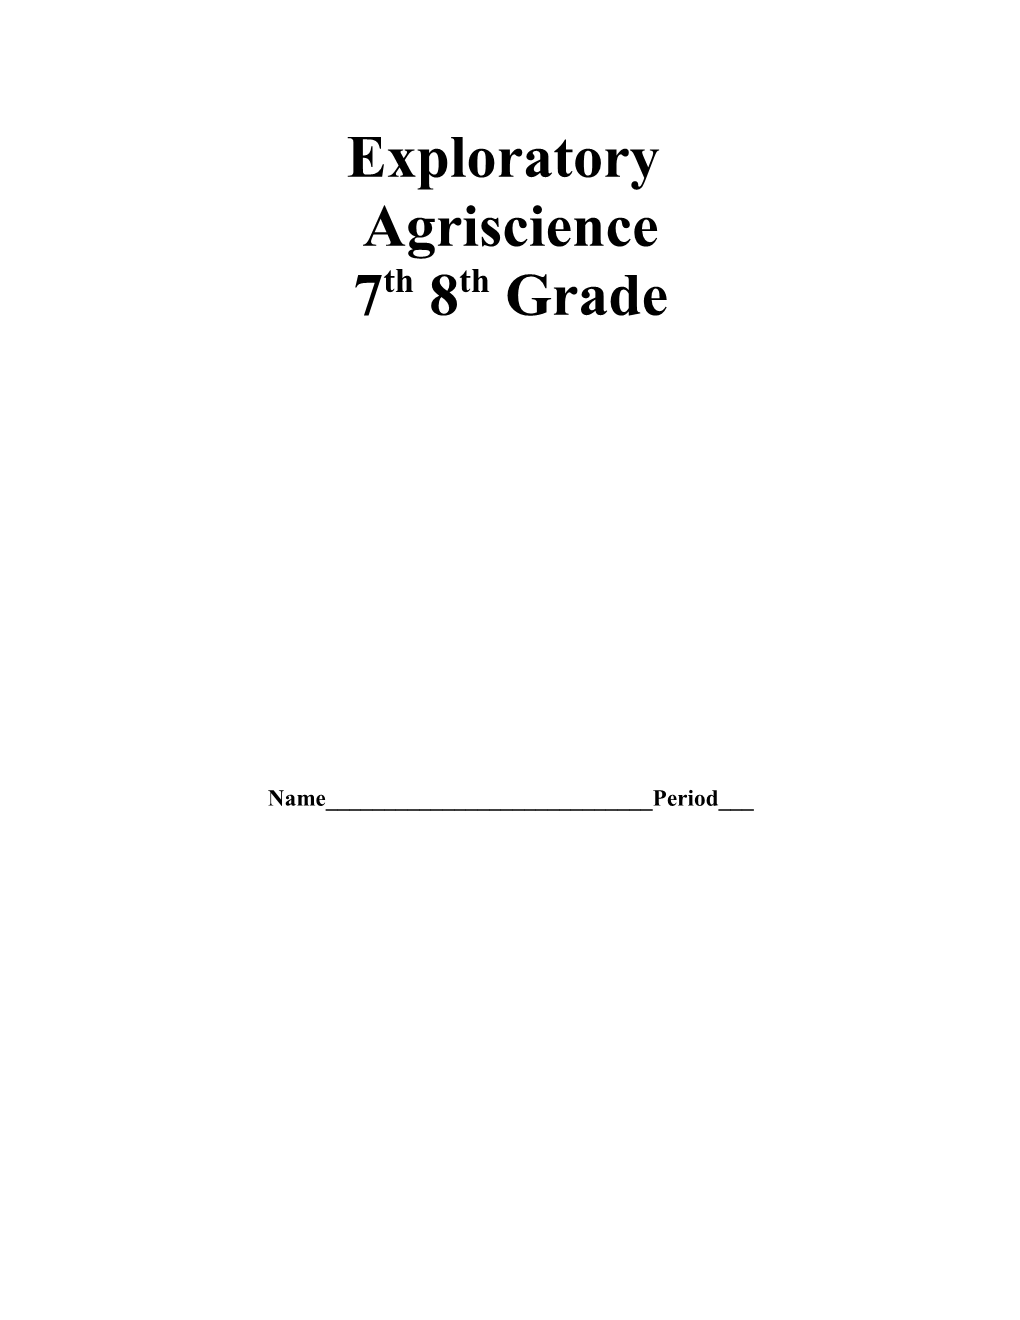 Exploratory Agriscience Overview